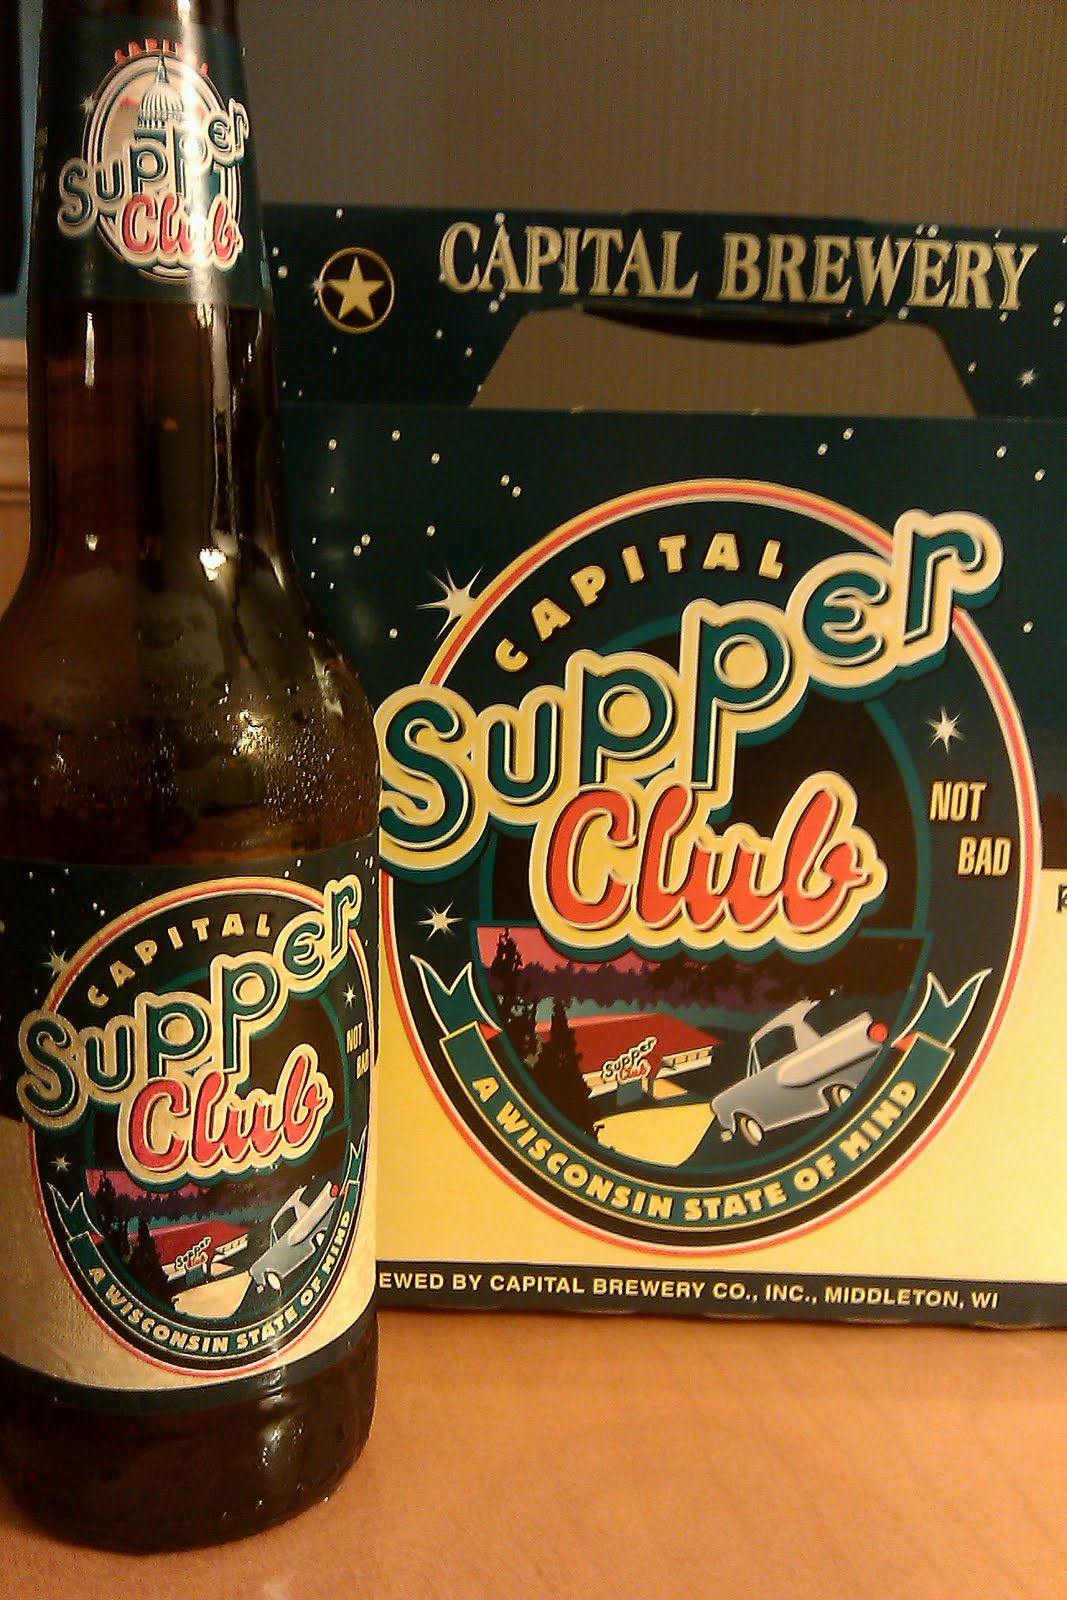 How Many Calories In Supper Club Beer